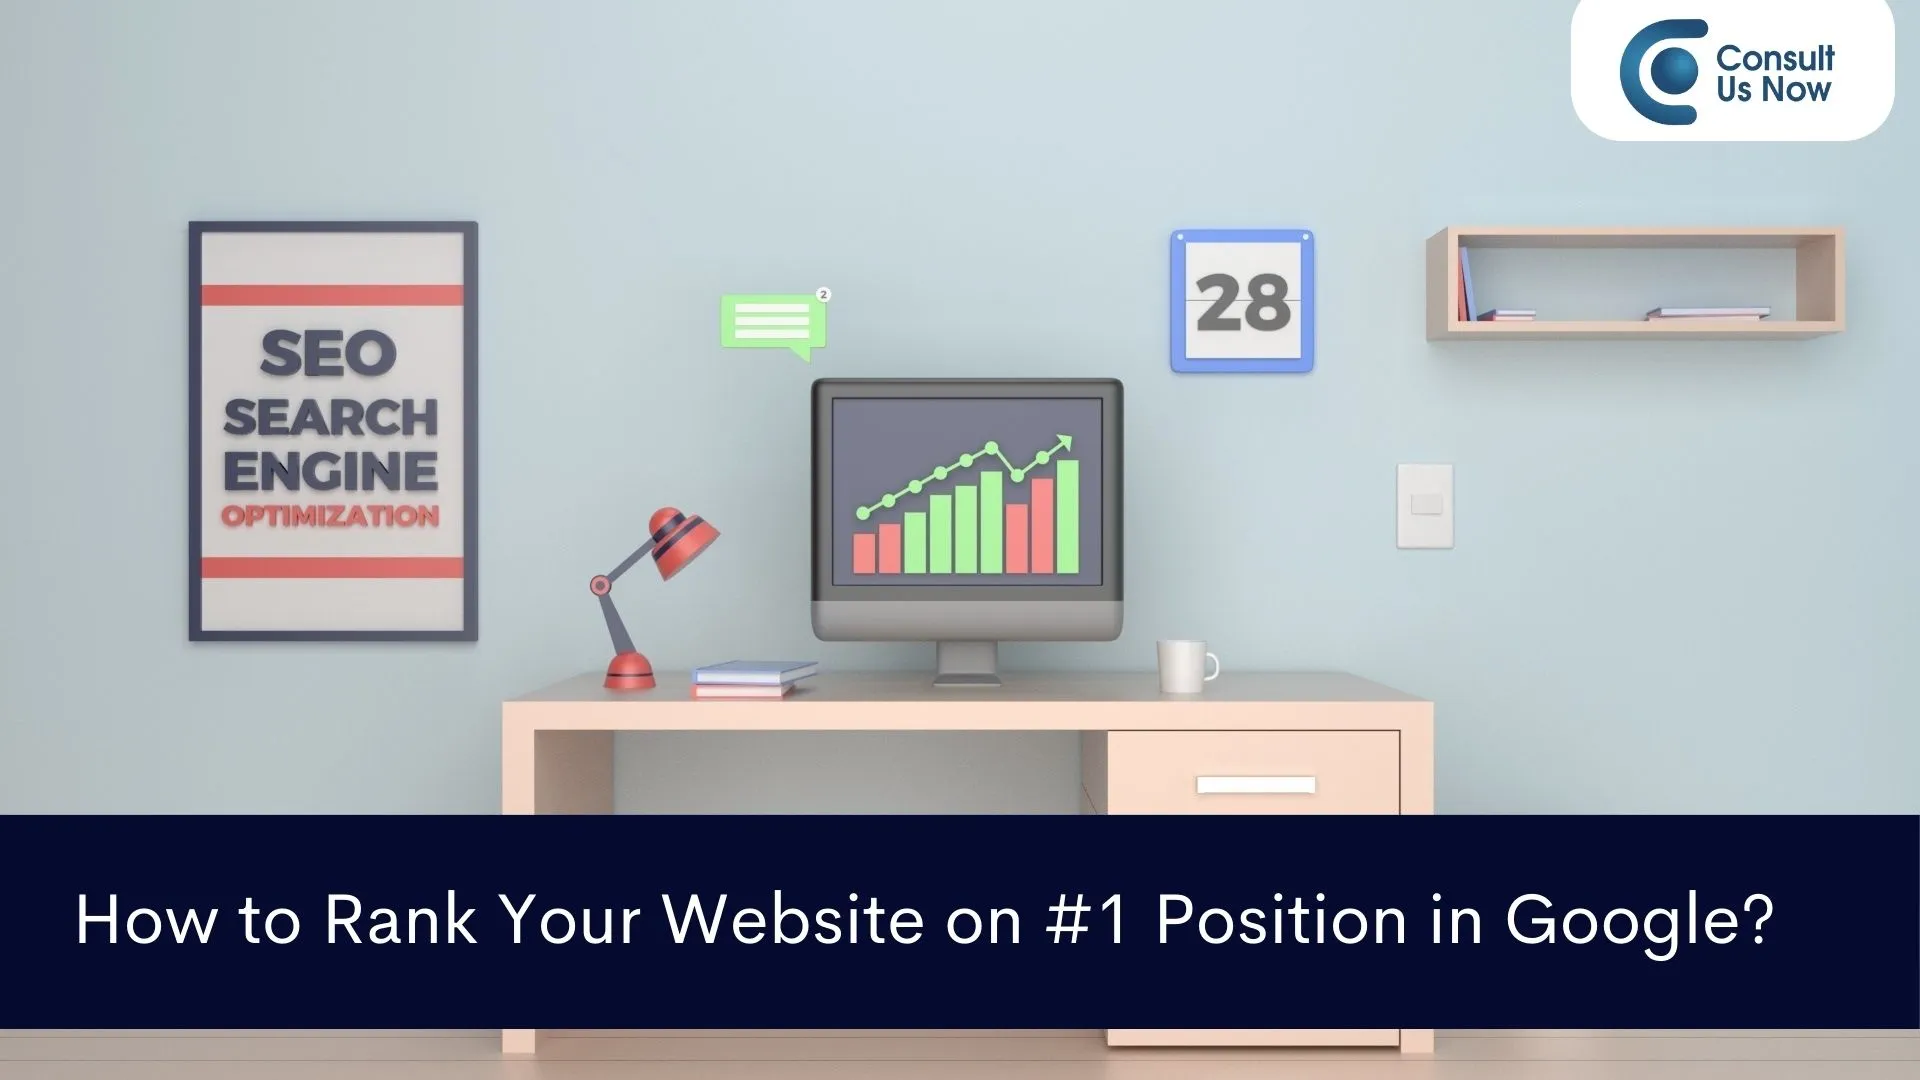 How to Rank Your Website on #1 Position in Google?